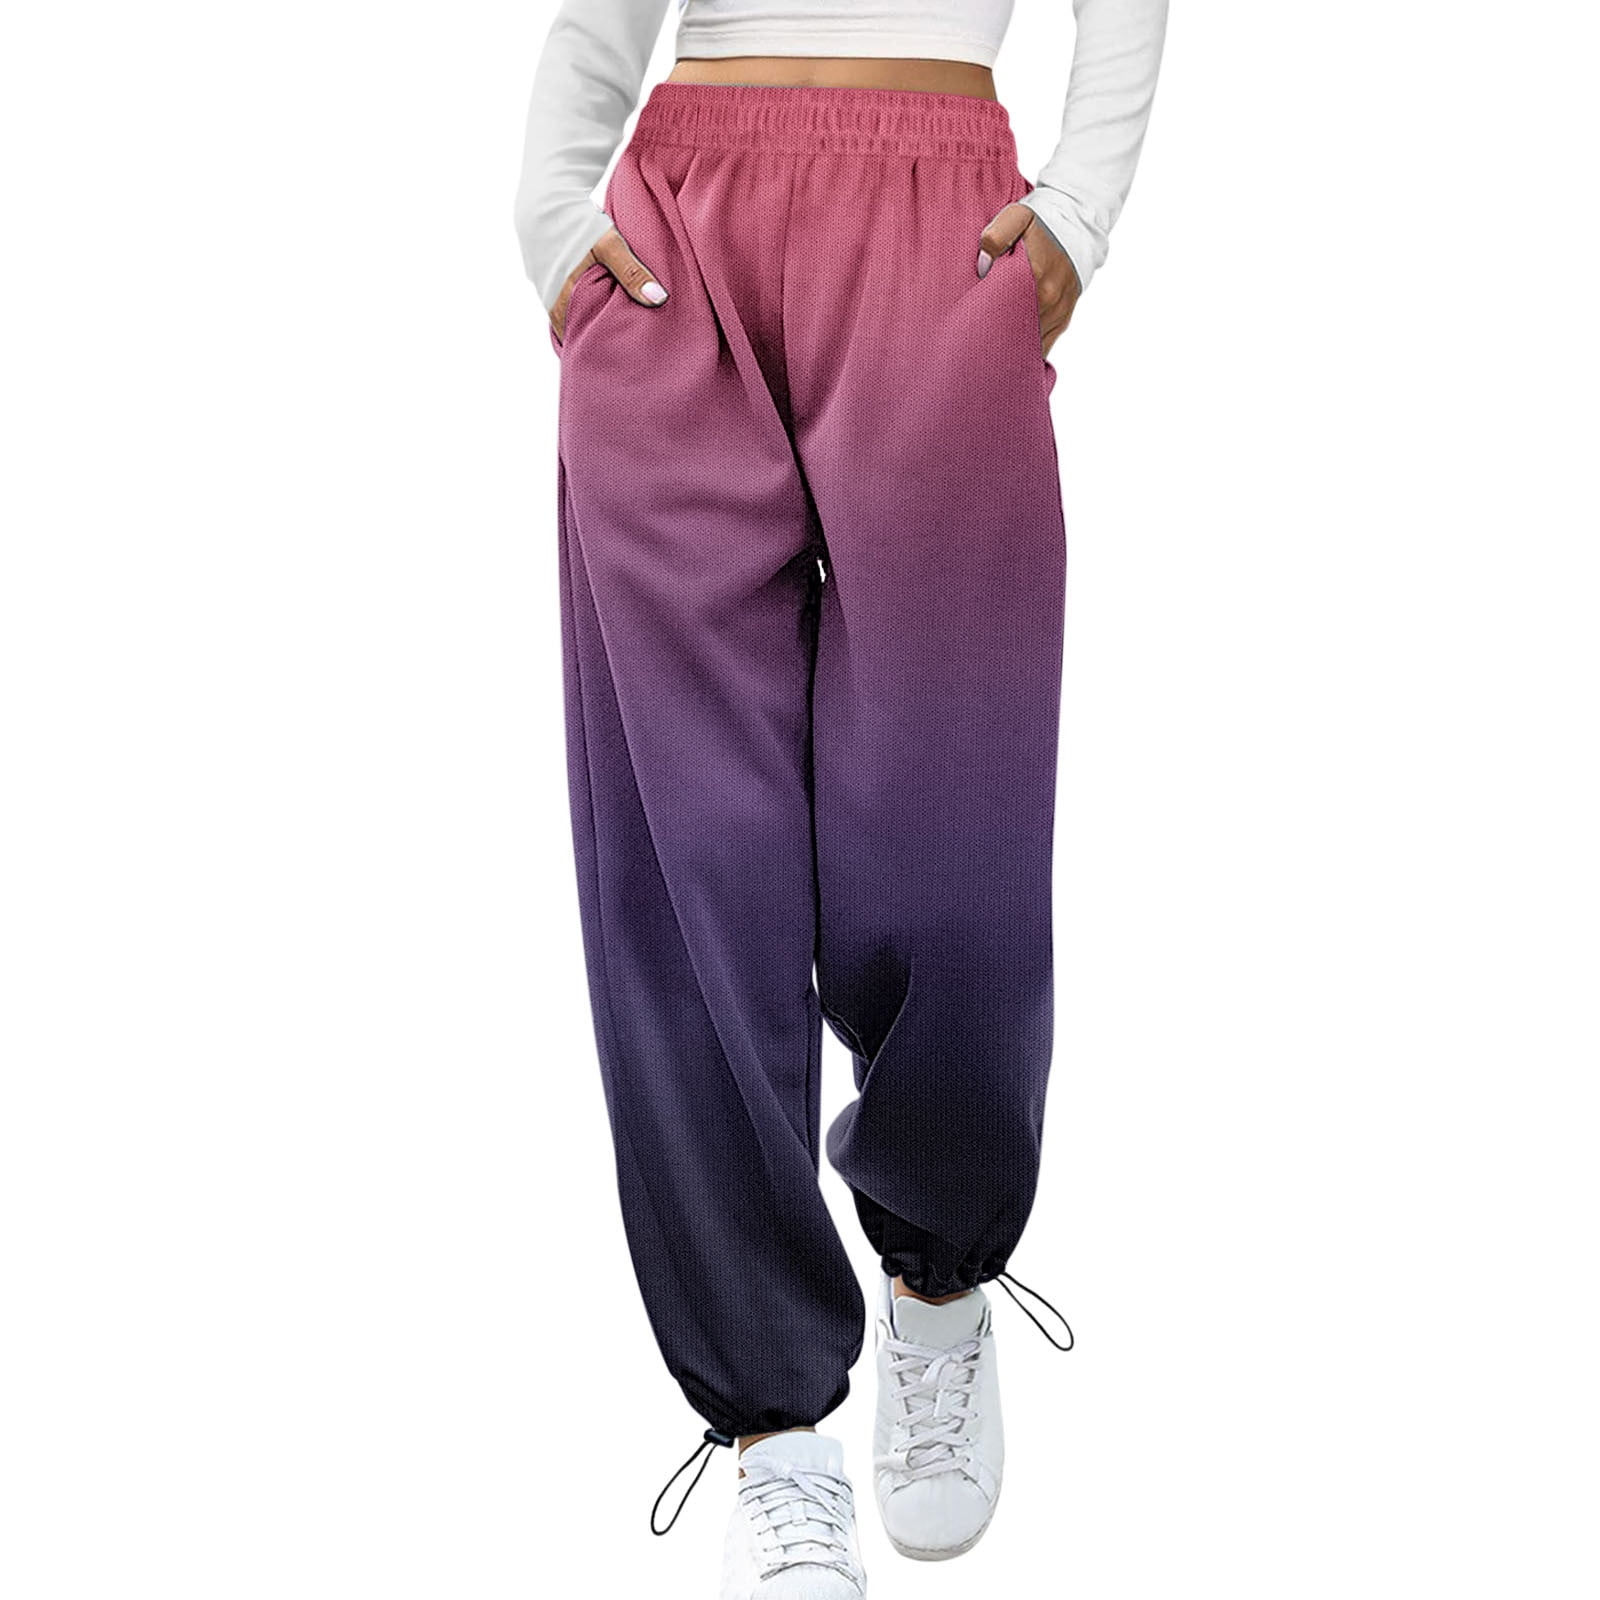 Womens Sweatpants Tall 34 Inseam Long Ladies Casual Trousers Solid Color  Stitching Pocket Lace Up Pants Women Fashion Leggings for Women Pack Plus  Size Sweatpants for Women with Pockets Plus Size 